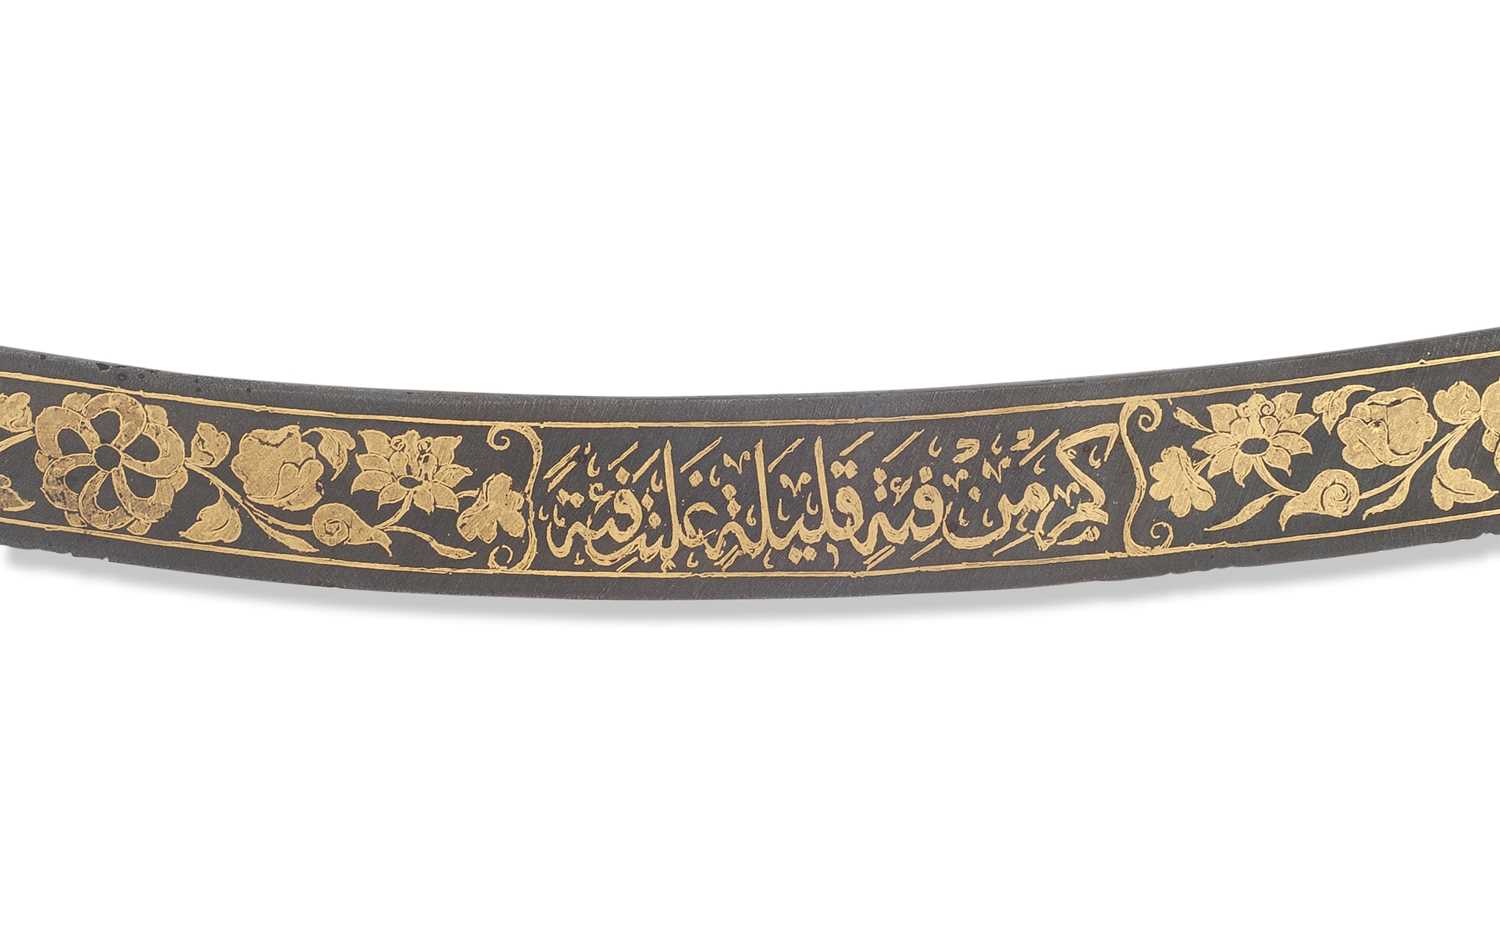 A LATE 18TH / EARLY 19TH CENTURY OTTOMAN (TURKEY) GOLD DAMASCENED SWORD (SHAMSHIR) - Image 4 of 5